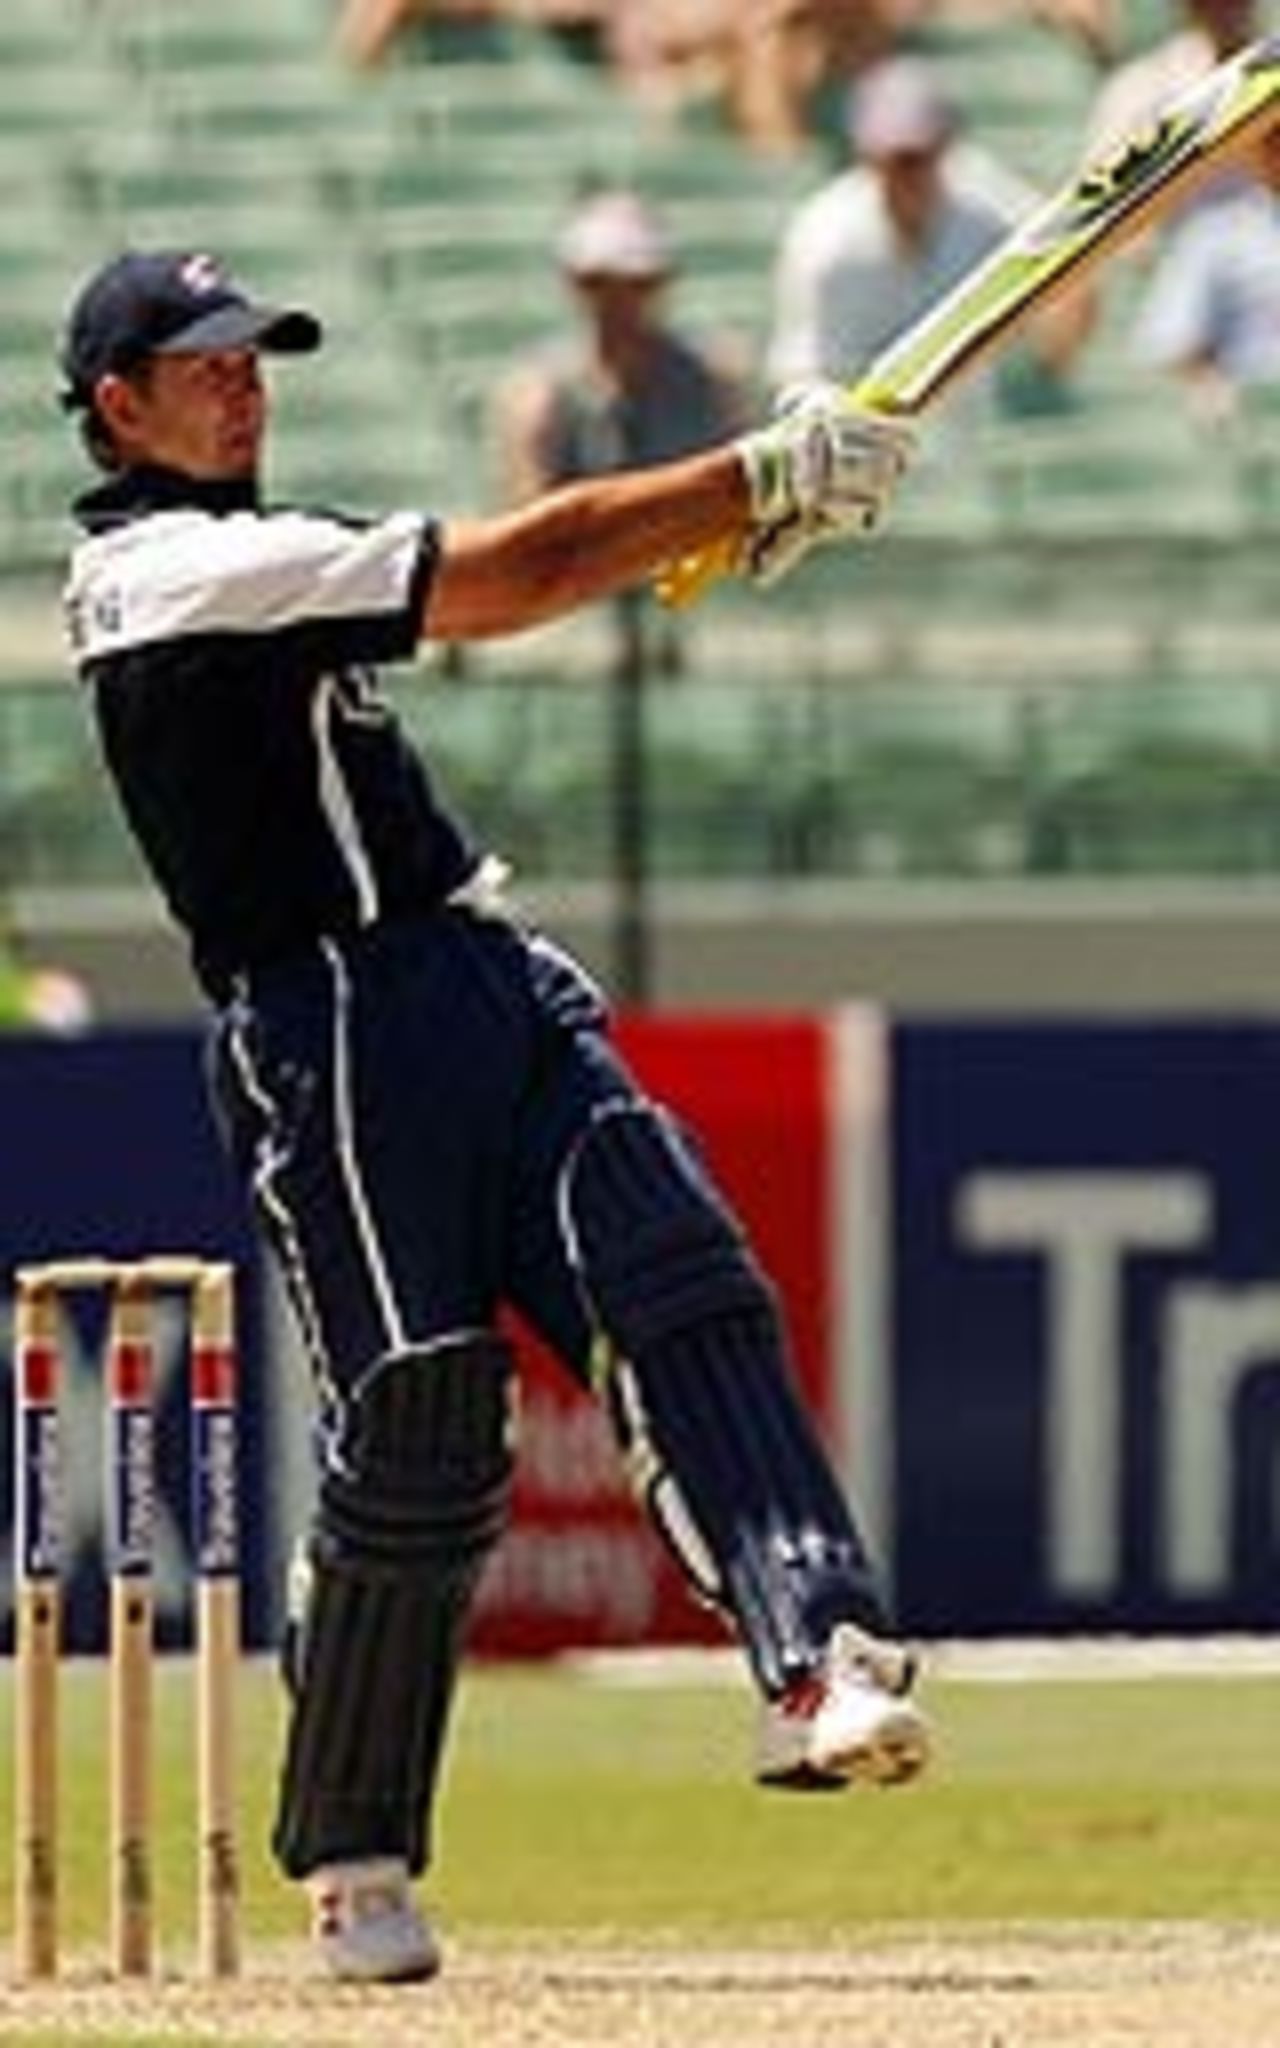 Ricky Ponting pulls one, ICC XI v Asian XI, Melbourne, January 10, 2005